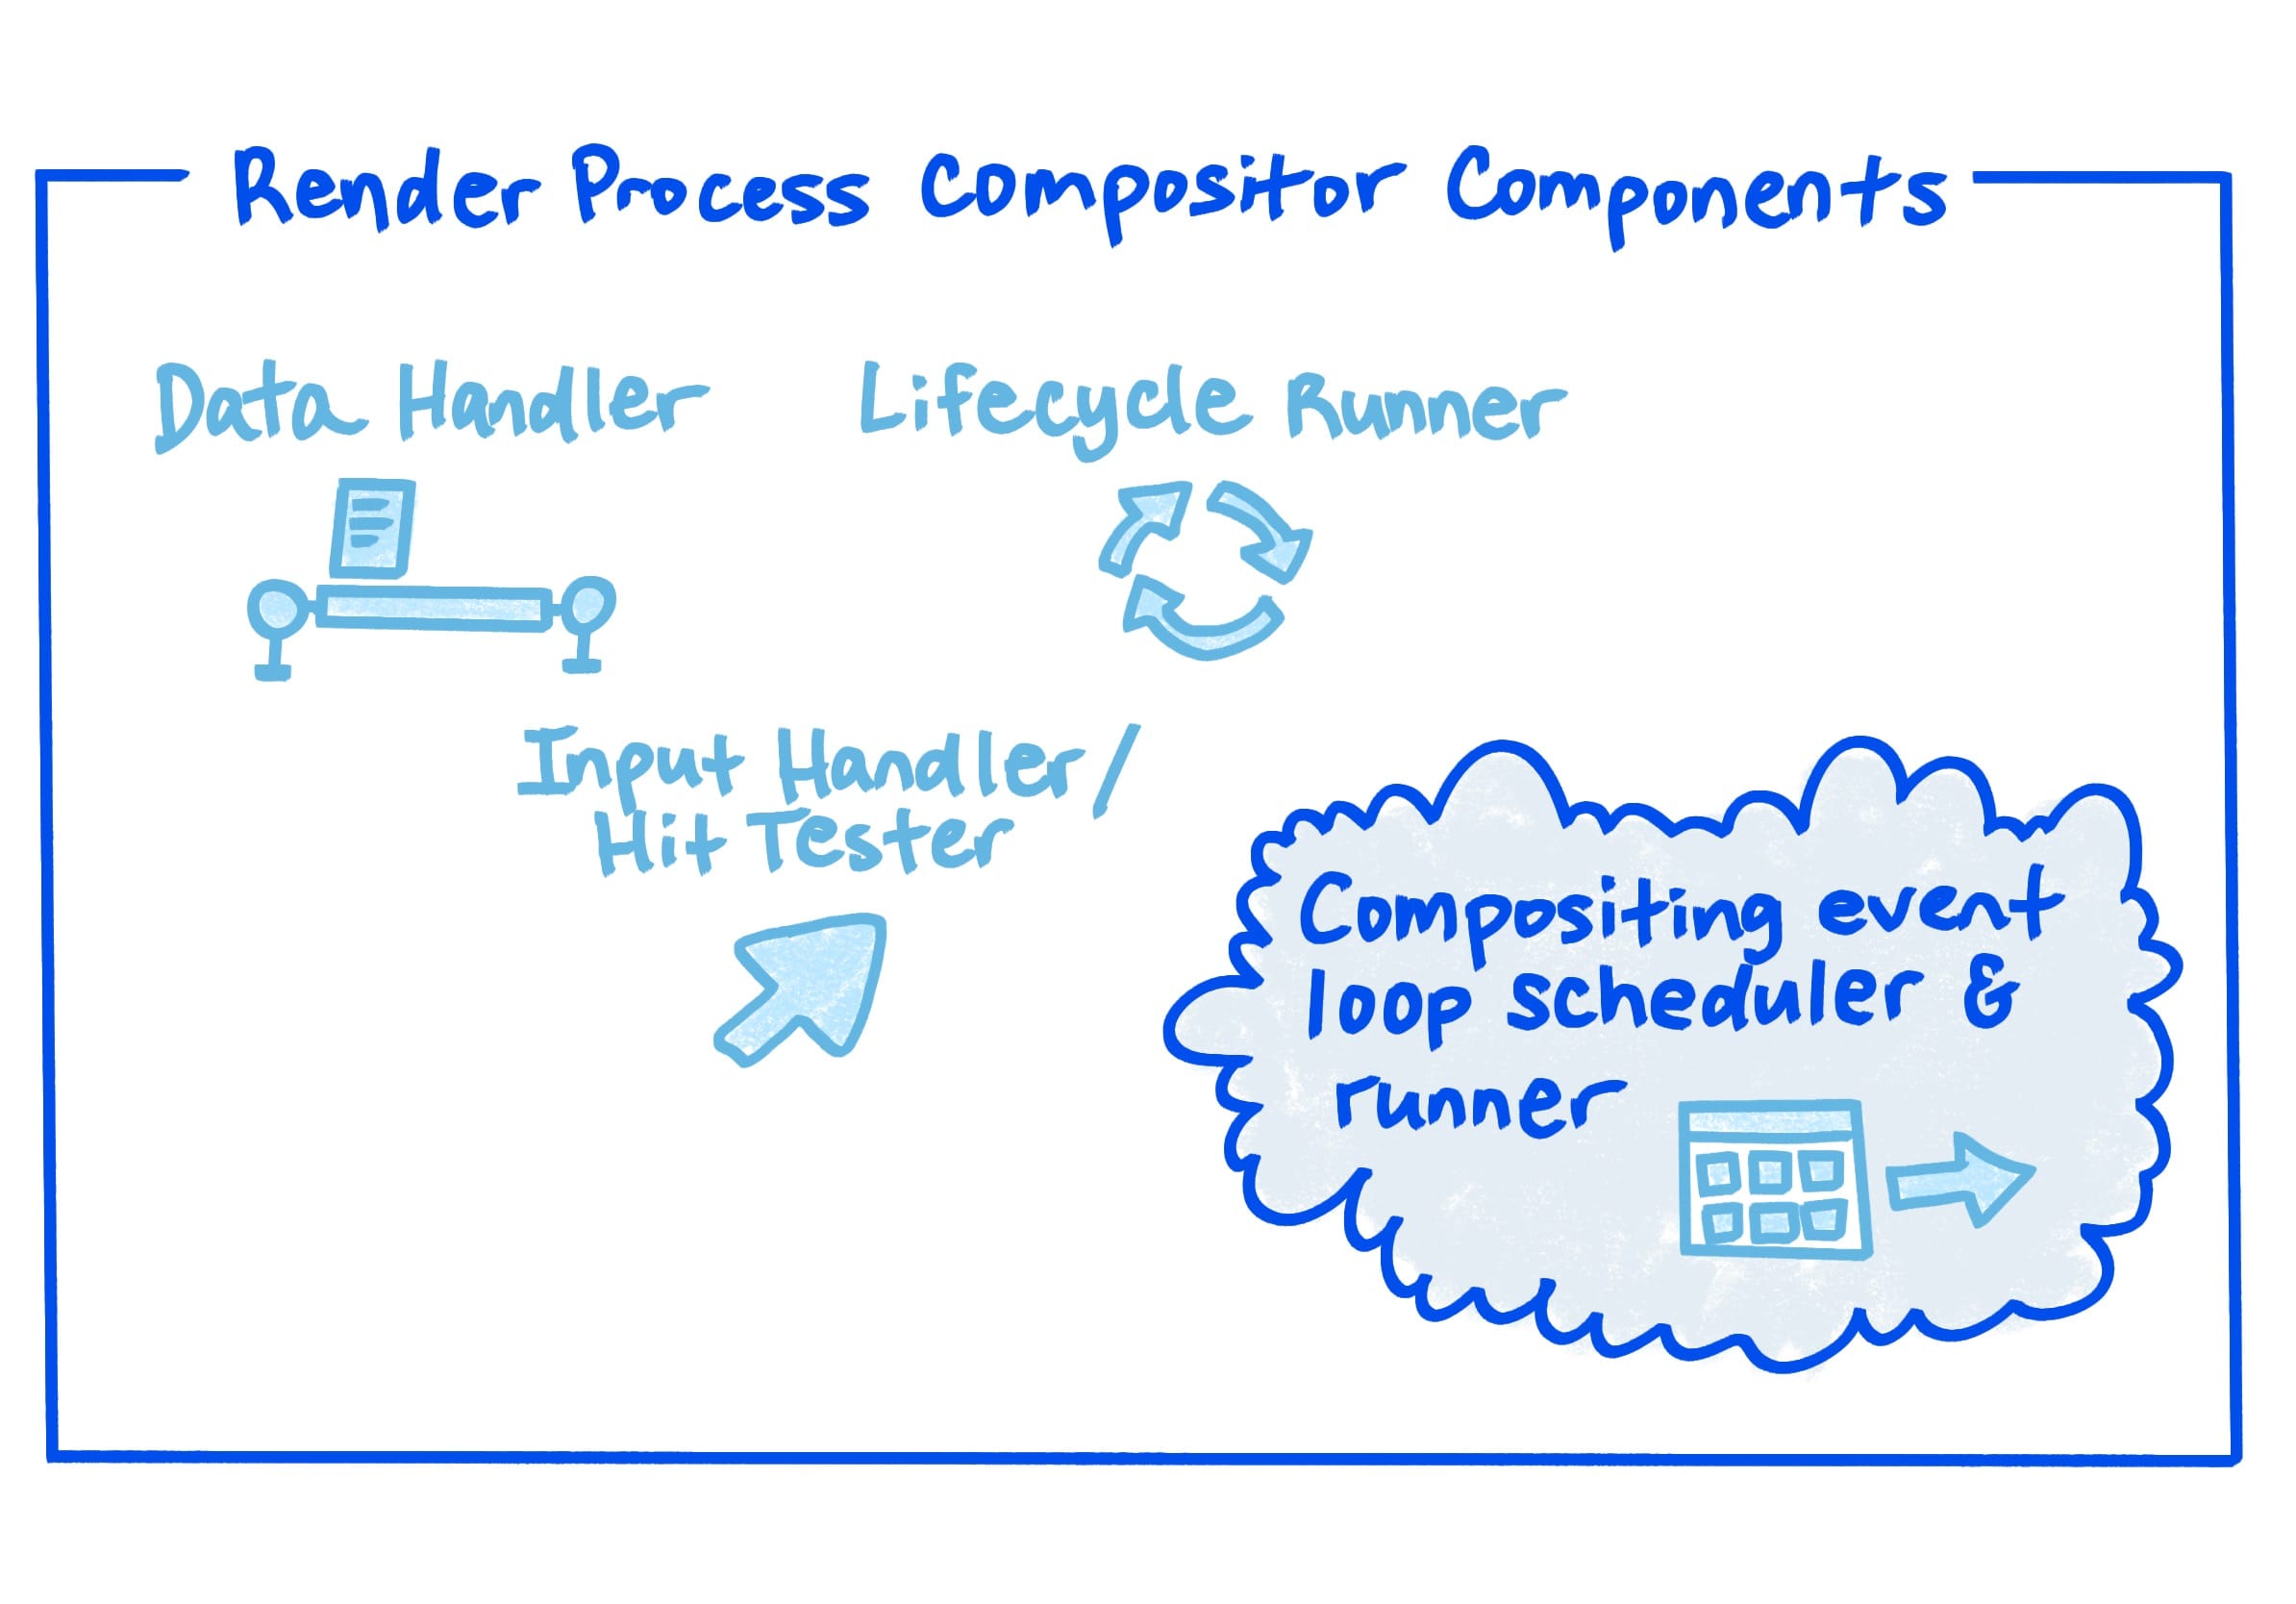 A diagram showing the render process compositor components.